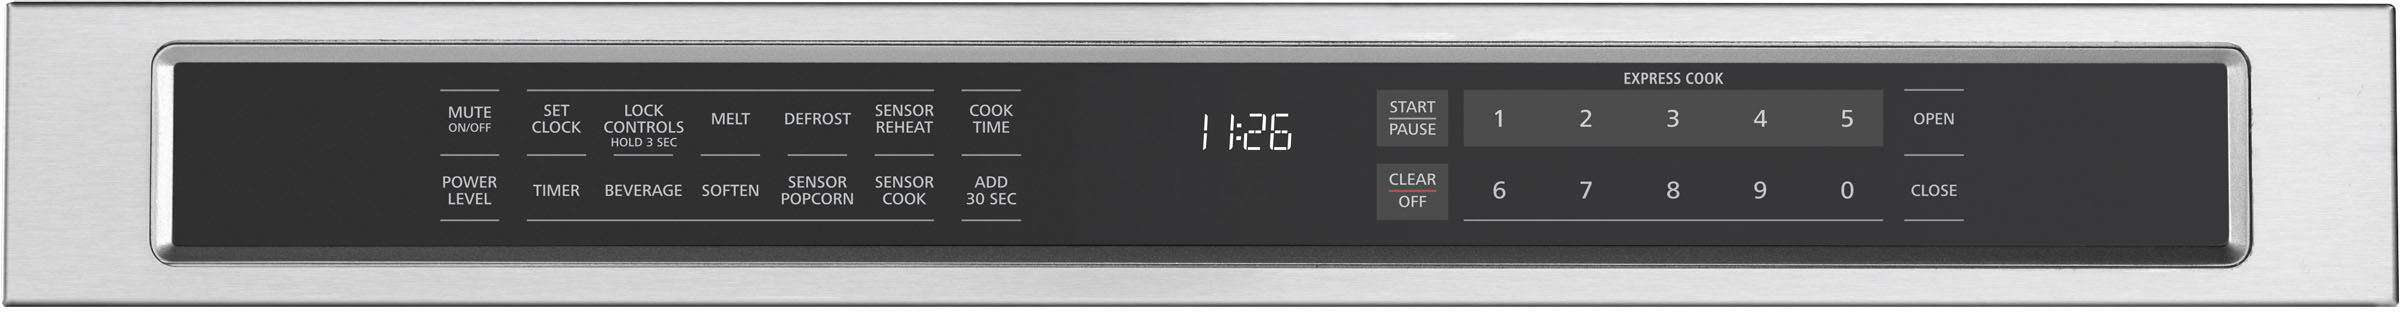 Angle View: GE - 1.6 Cu. Ft. Over-the-Range Microwave - Black